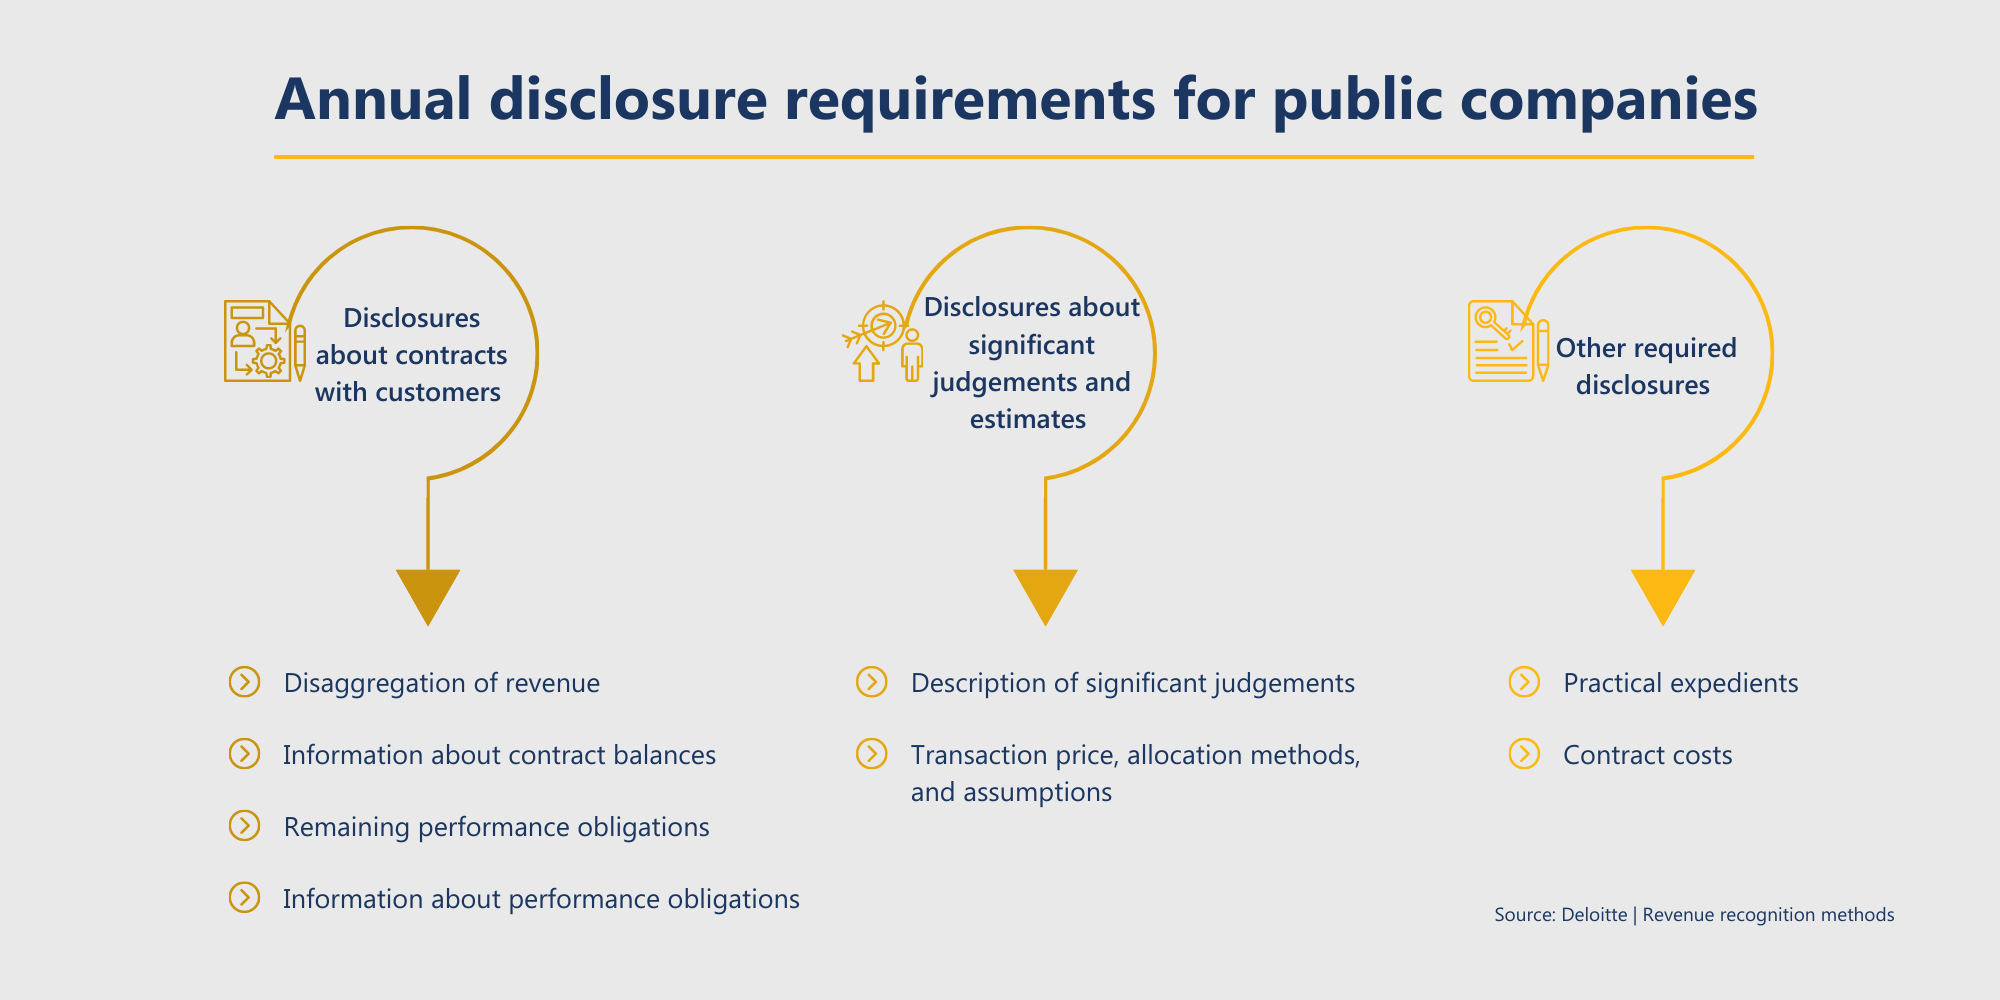 Required annual disclosures under ASC 606 and IFRS 15 for public entities